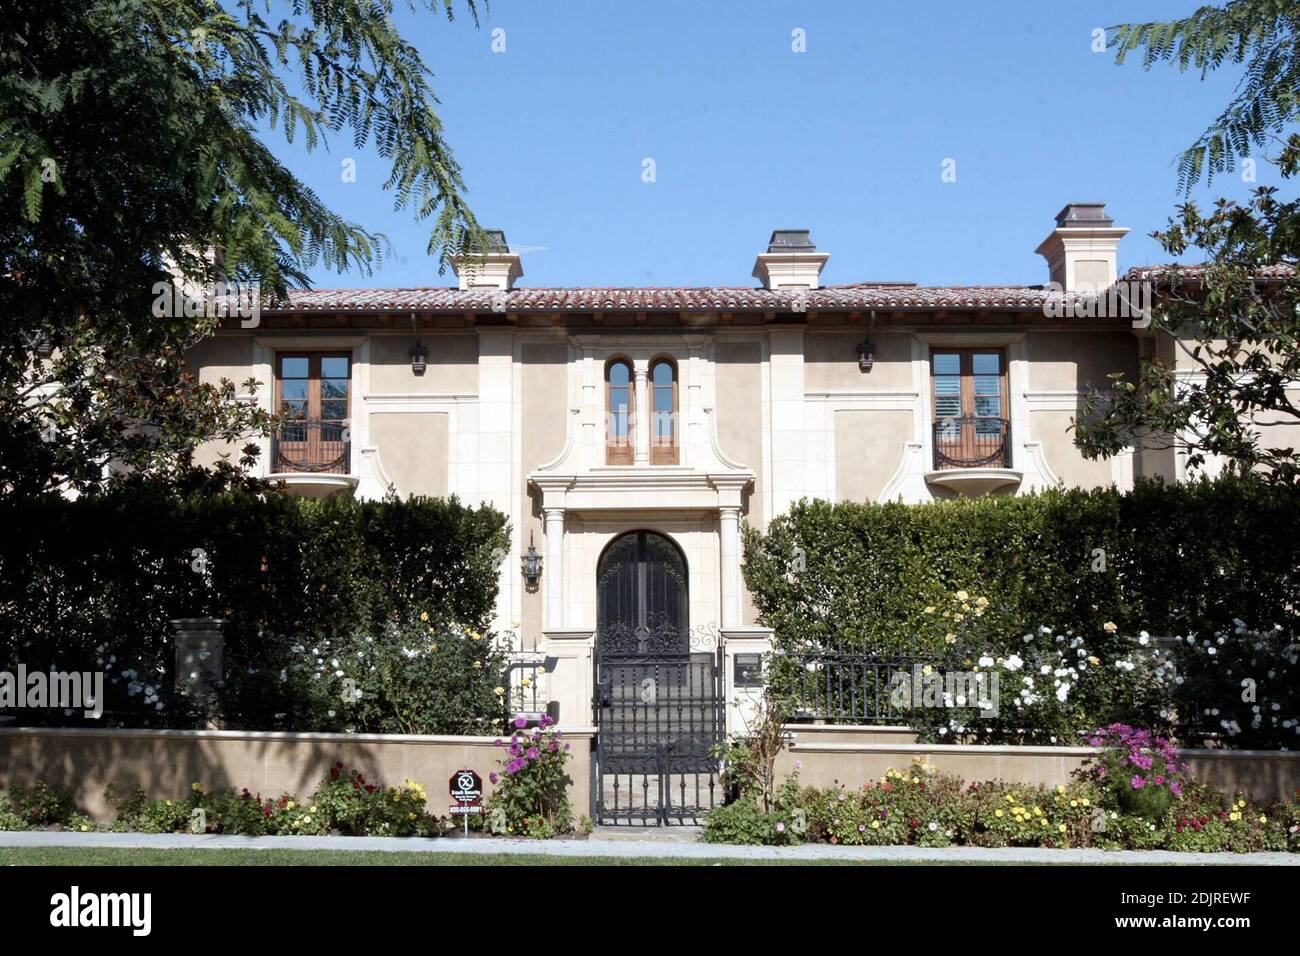 Jennifer Lopez' new Beverly Hills mansion in Ca. The plot once belonged to James 'Jimmy' Stewart but the house was demolished to make room for Lopez' multi-million dollar home. 10/21/06 Stock Photo